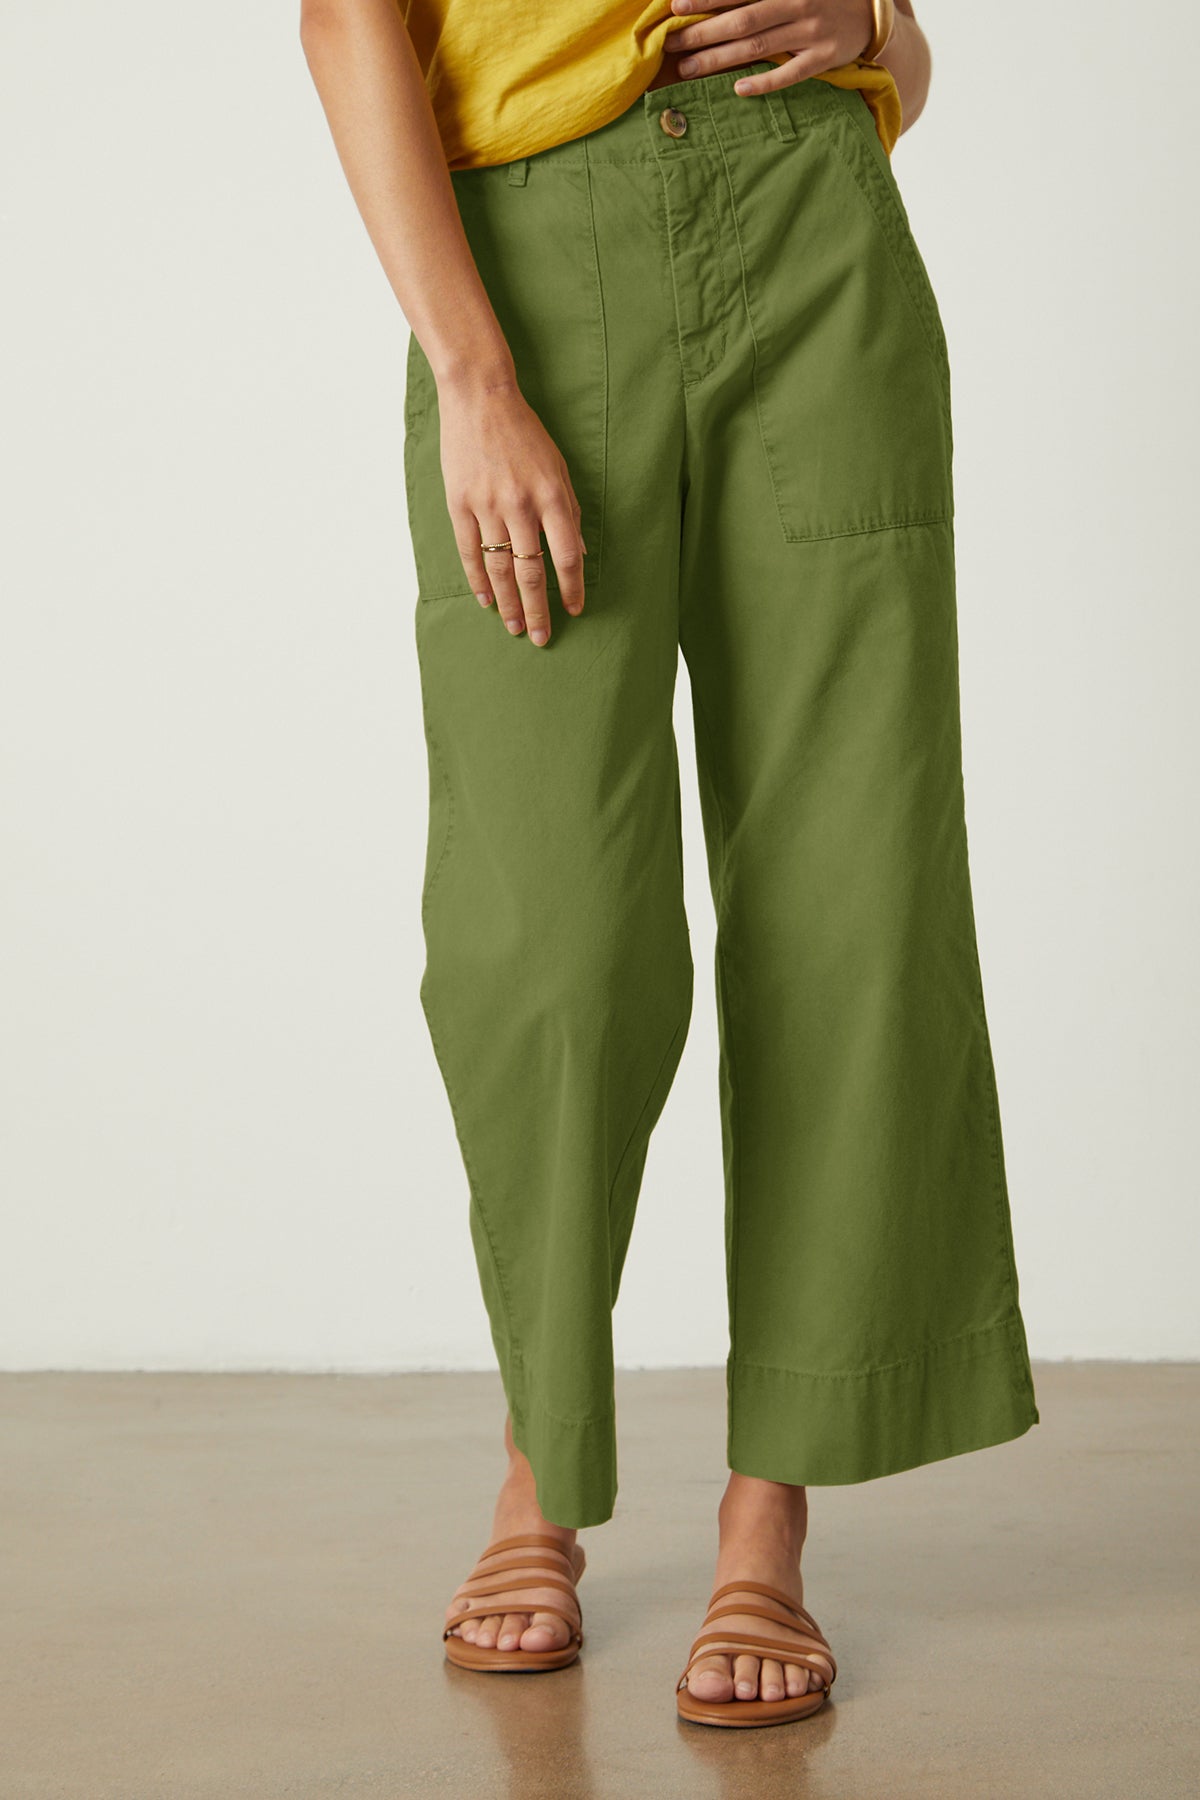 Mya Pant in soft army green color front-25954630074561